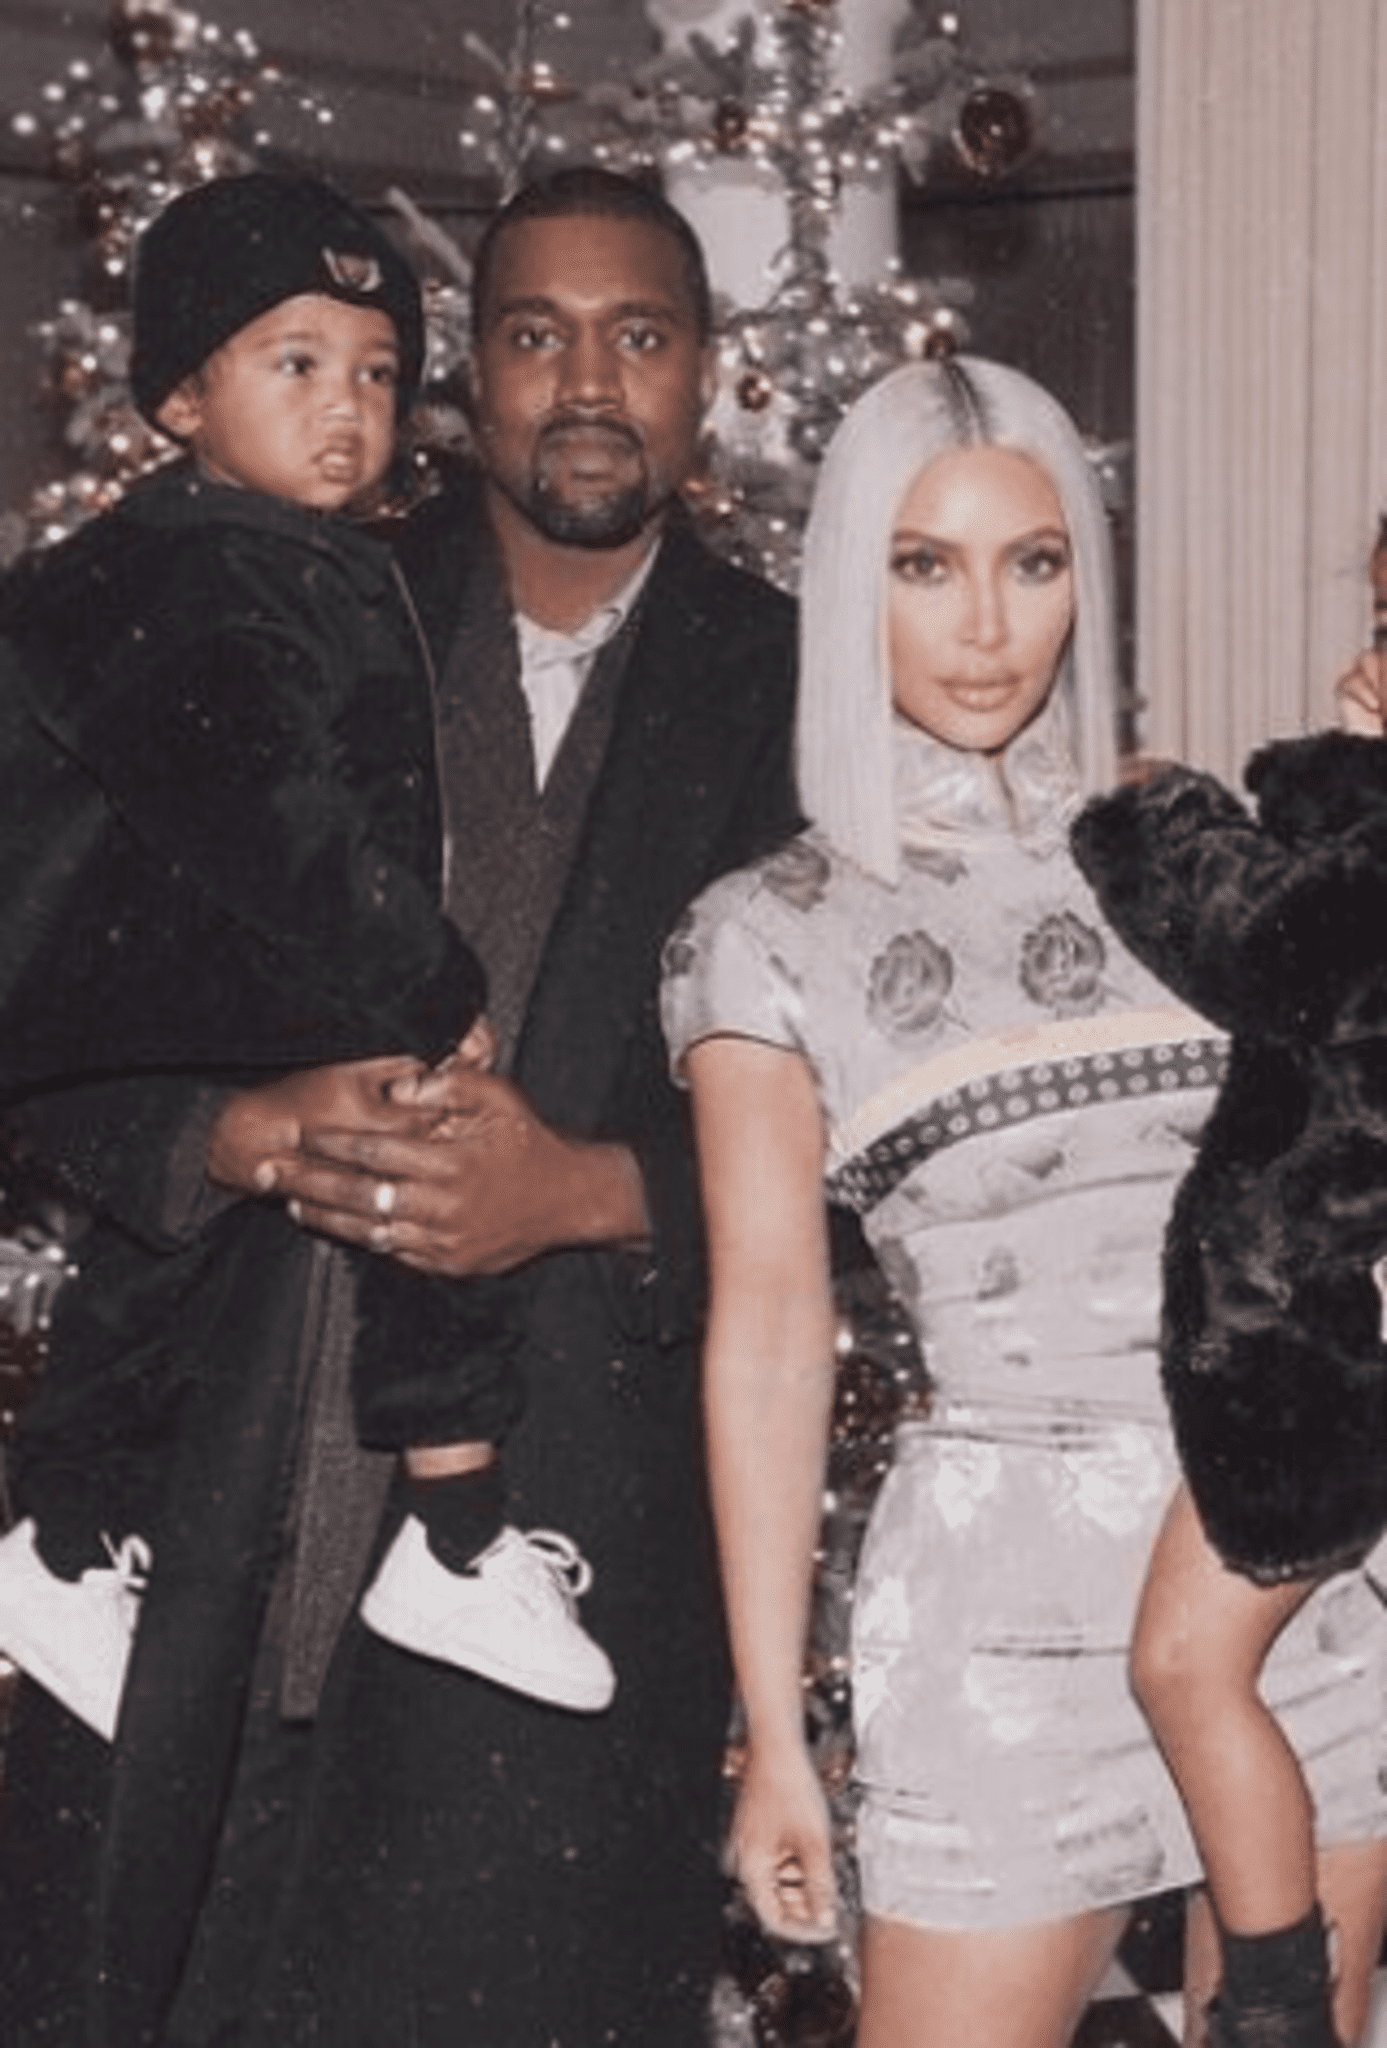 Kim Kardashian Claims That Thanks To Kanye West, She Has Gained New Respect In The Elite